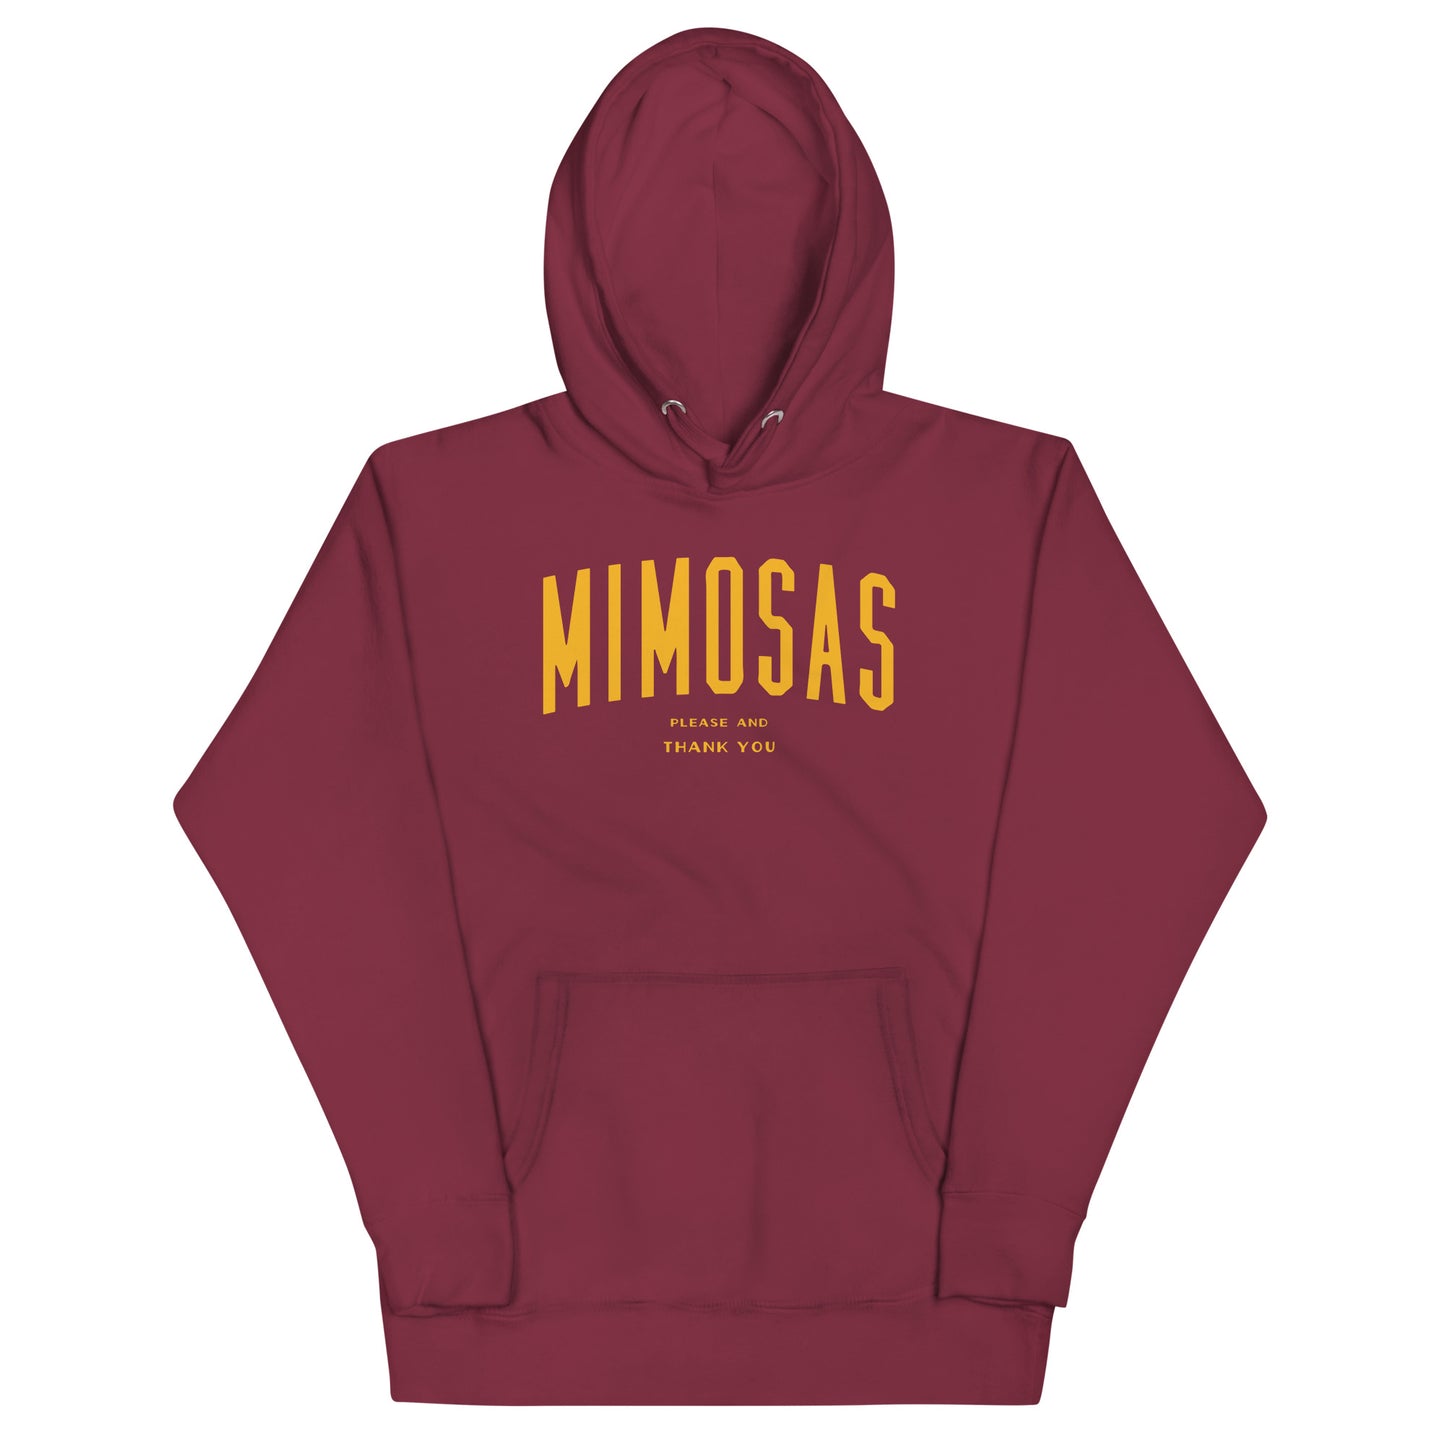 Mimosas Please And Thank You Unisex Hoodie